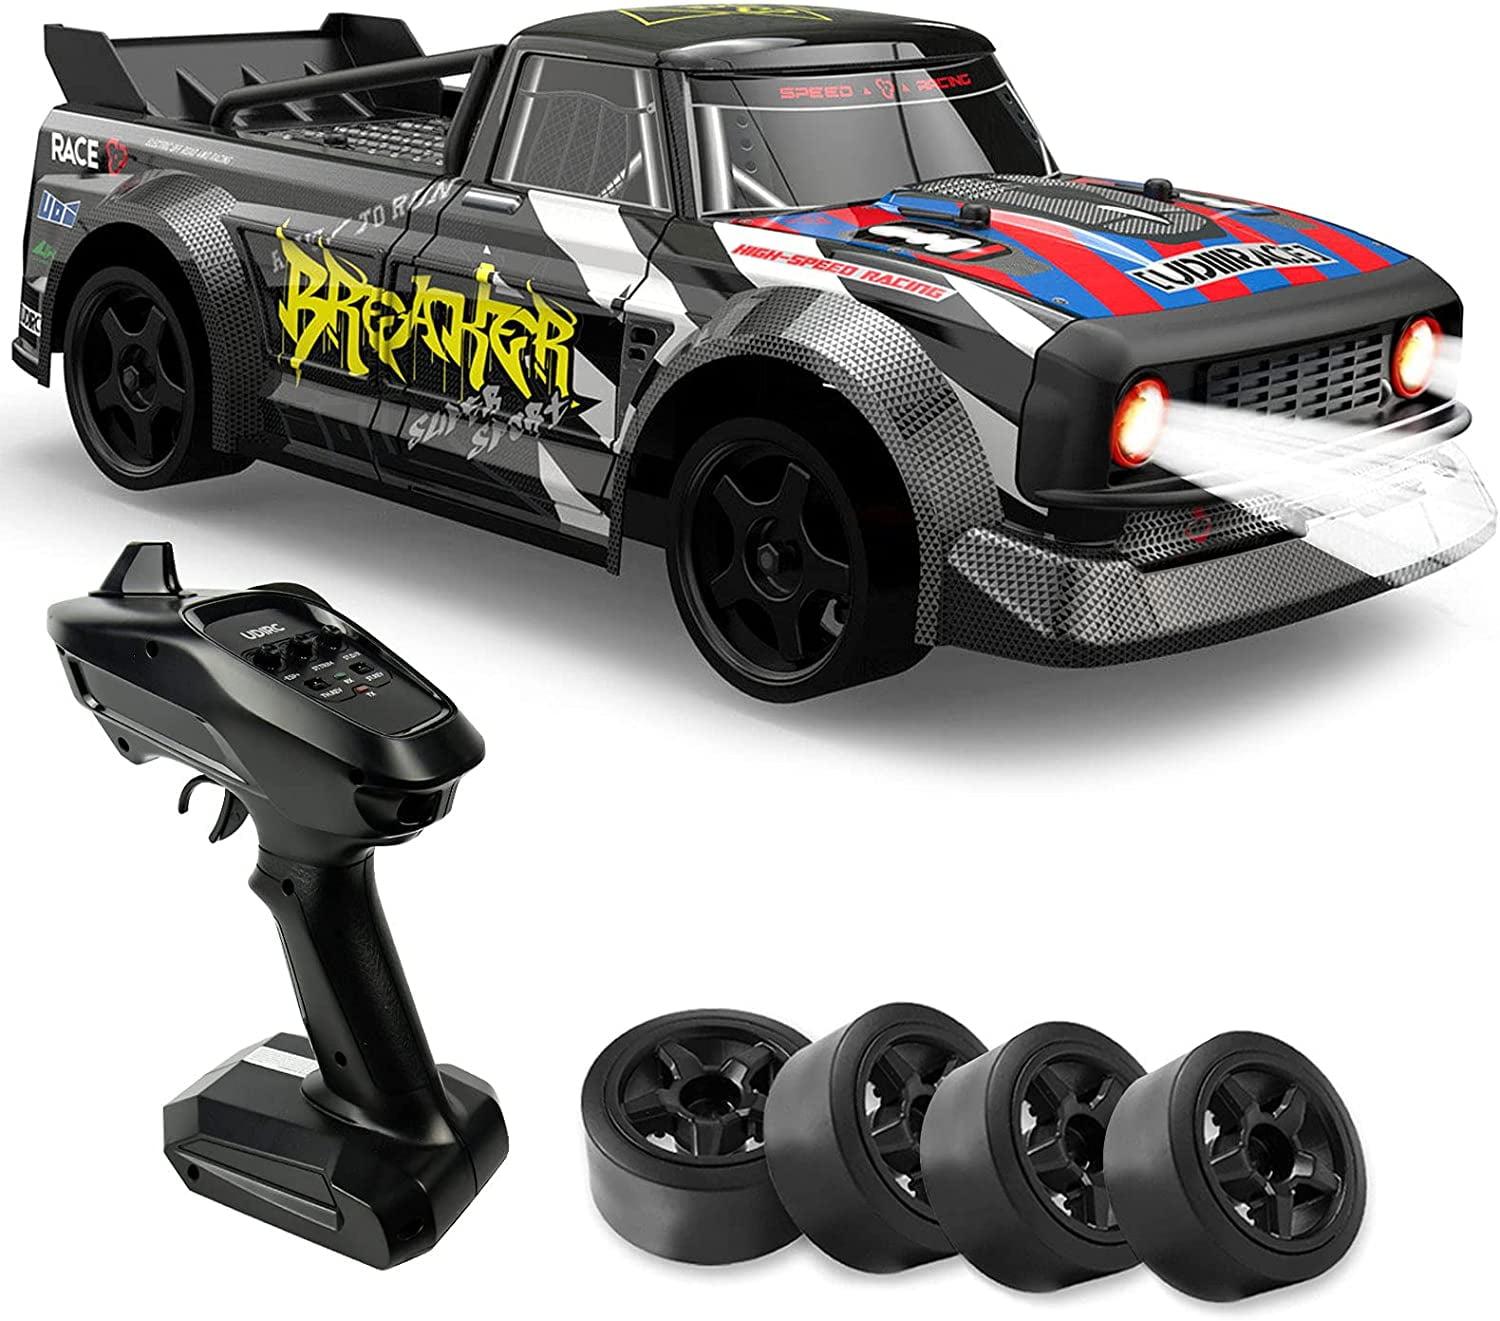 Red G006 for sale online Air Hogs Zero Gravity Laser Guided Wall Climbing Remote Control Car 